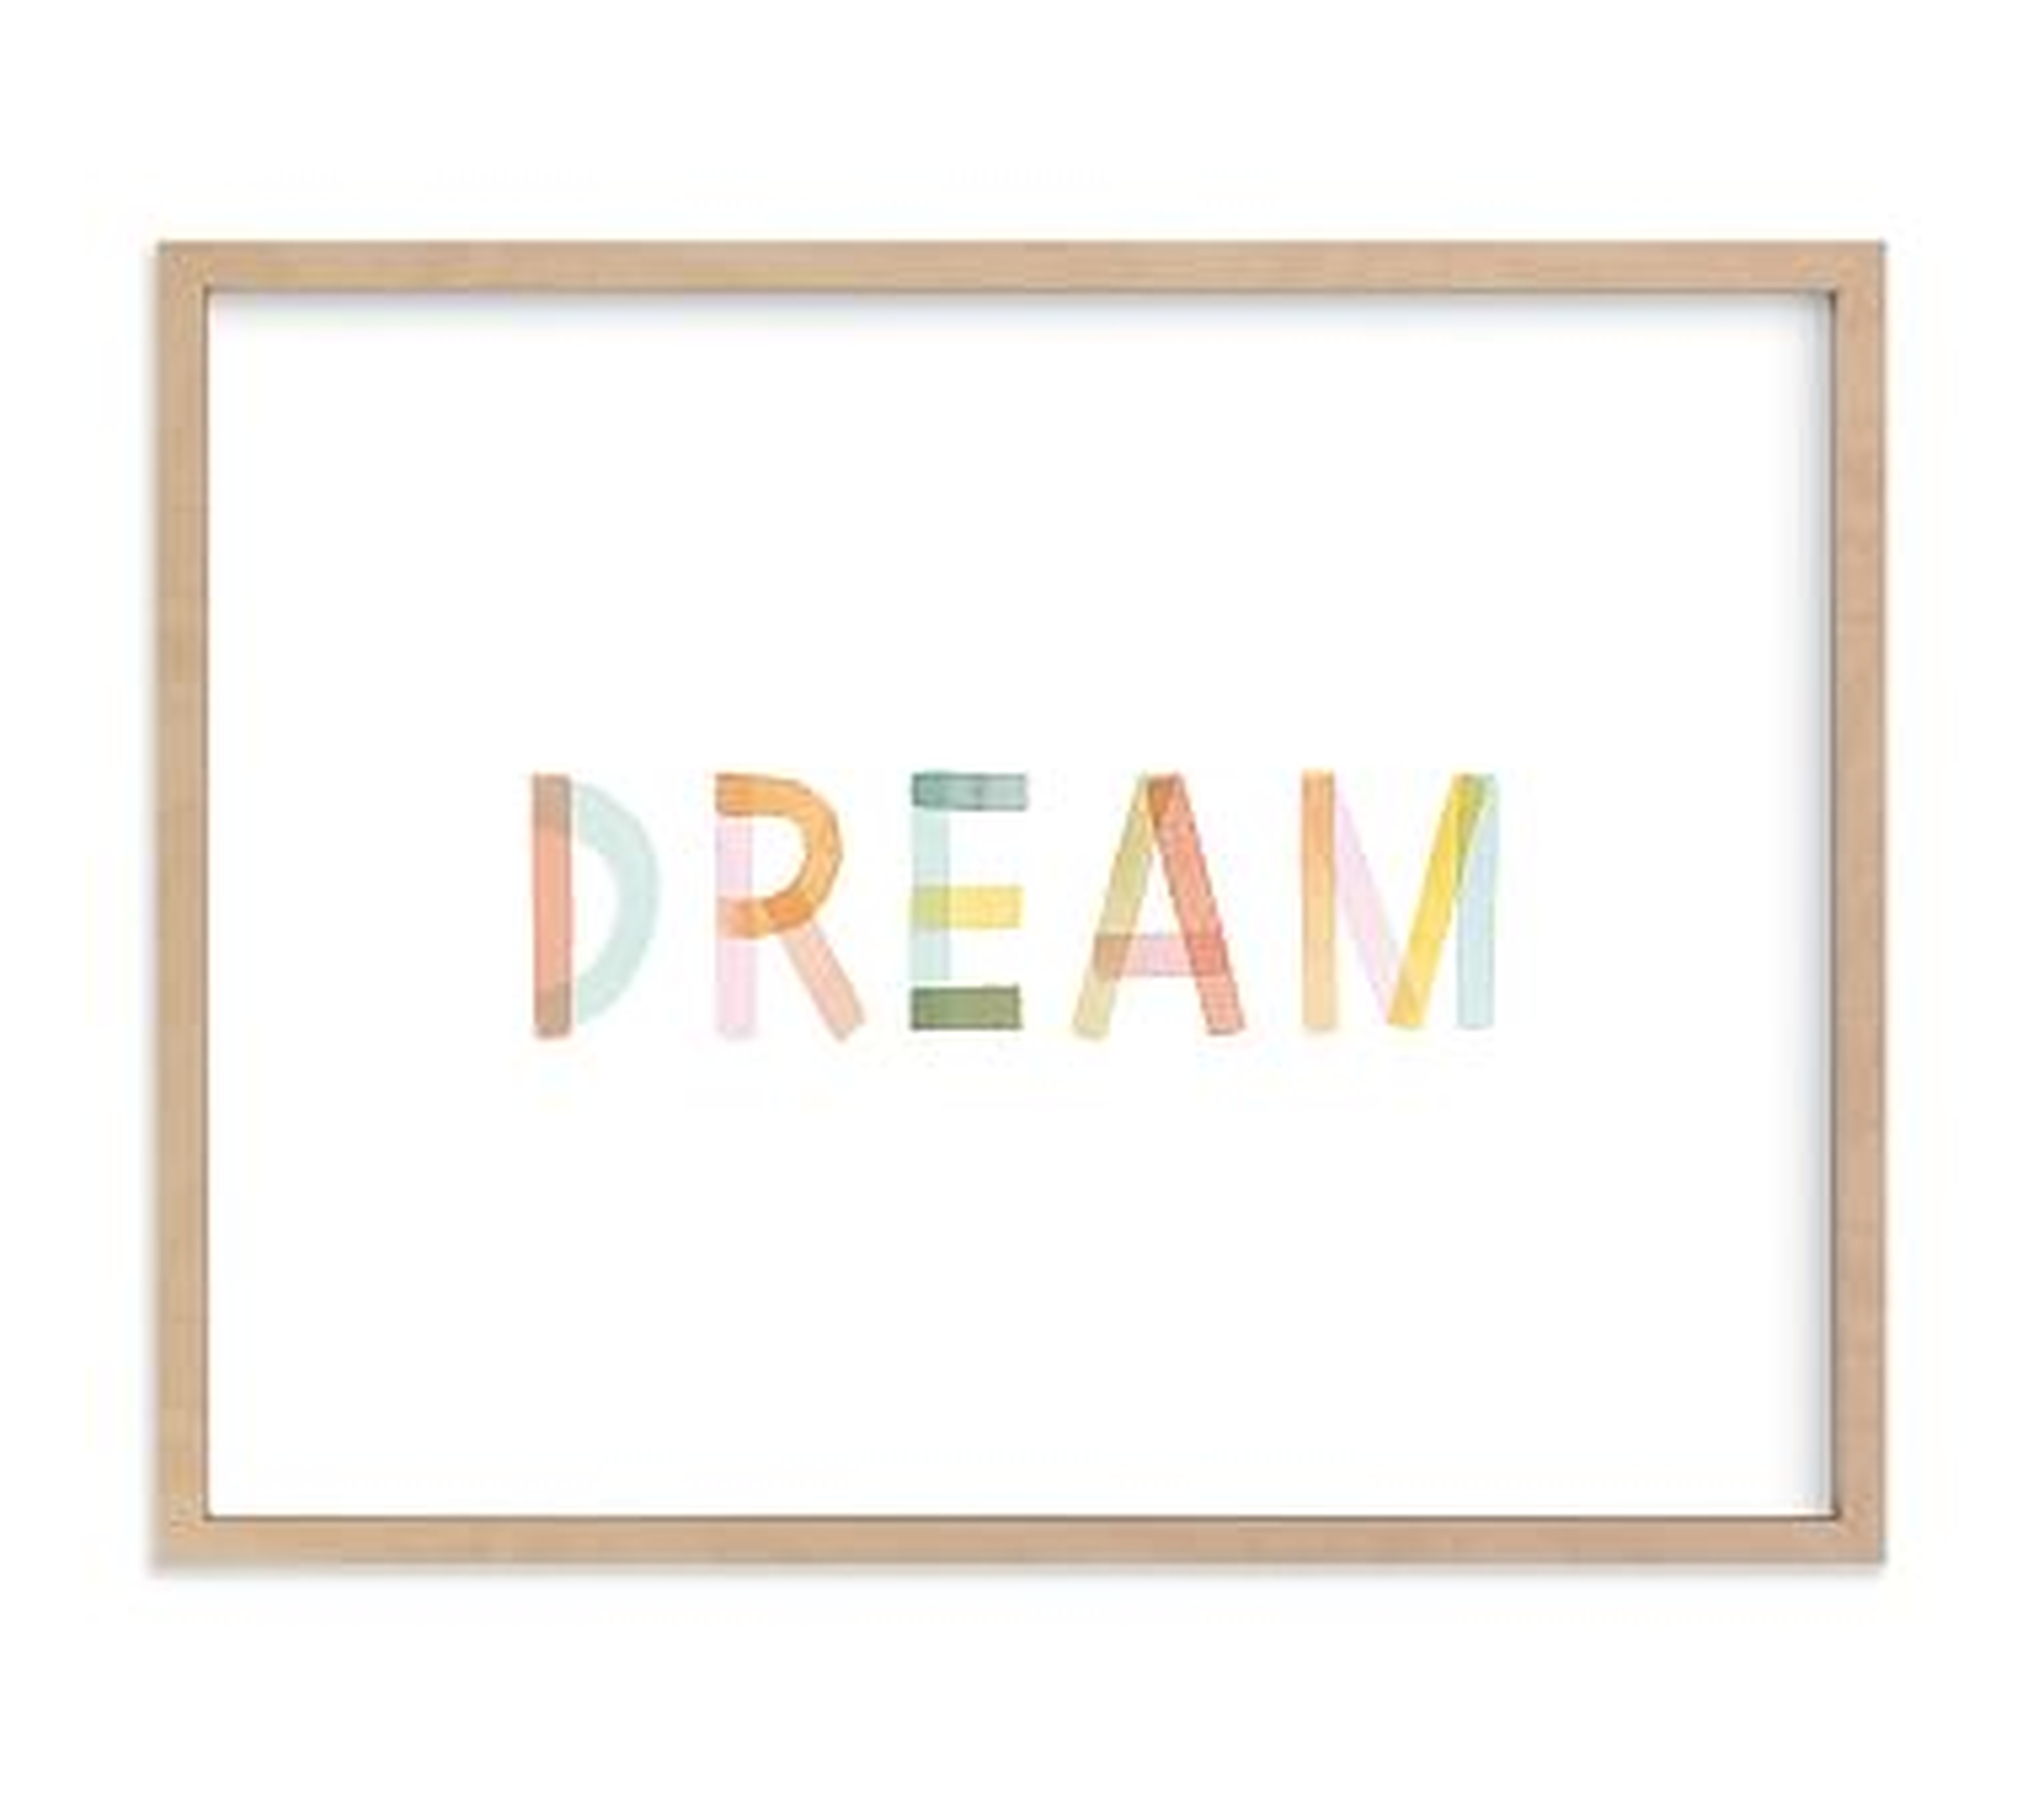 Dreaming in Color Wall Art by Minted(R), 24x18, Natural - Pottery Barn Kids